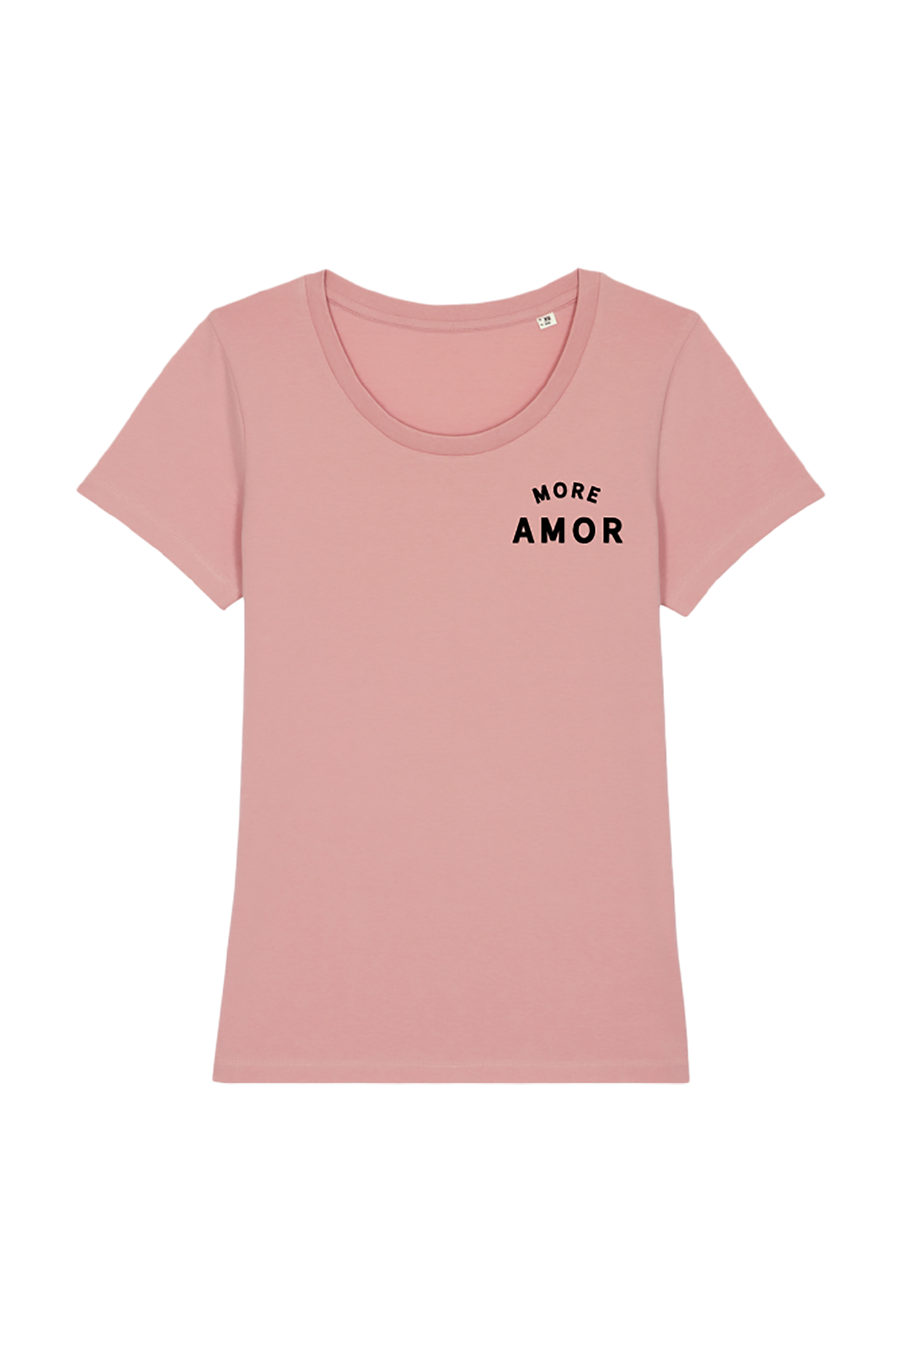 More amor - Joh Clothing